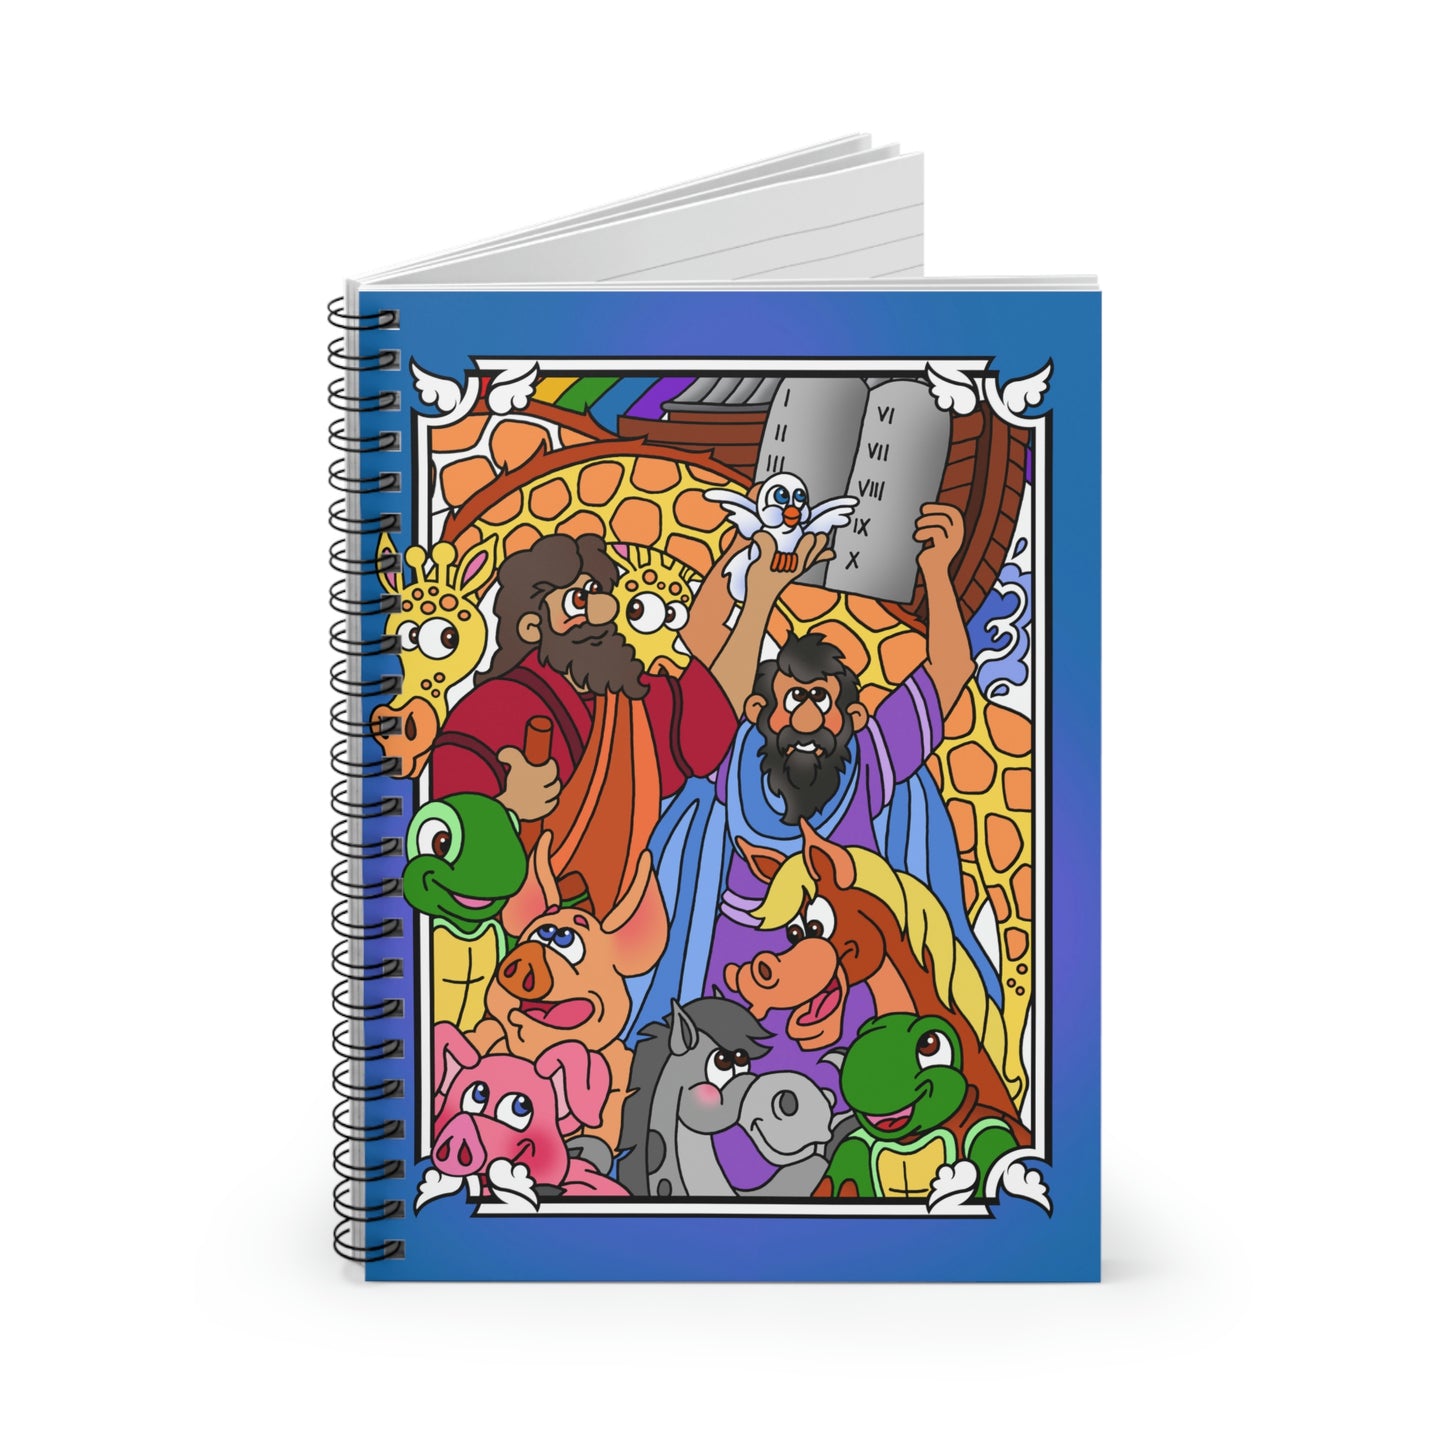 Hark and Harold Angel Sing! Spiral Notebook - Ruled Line